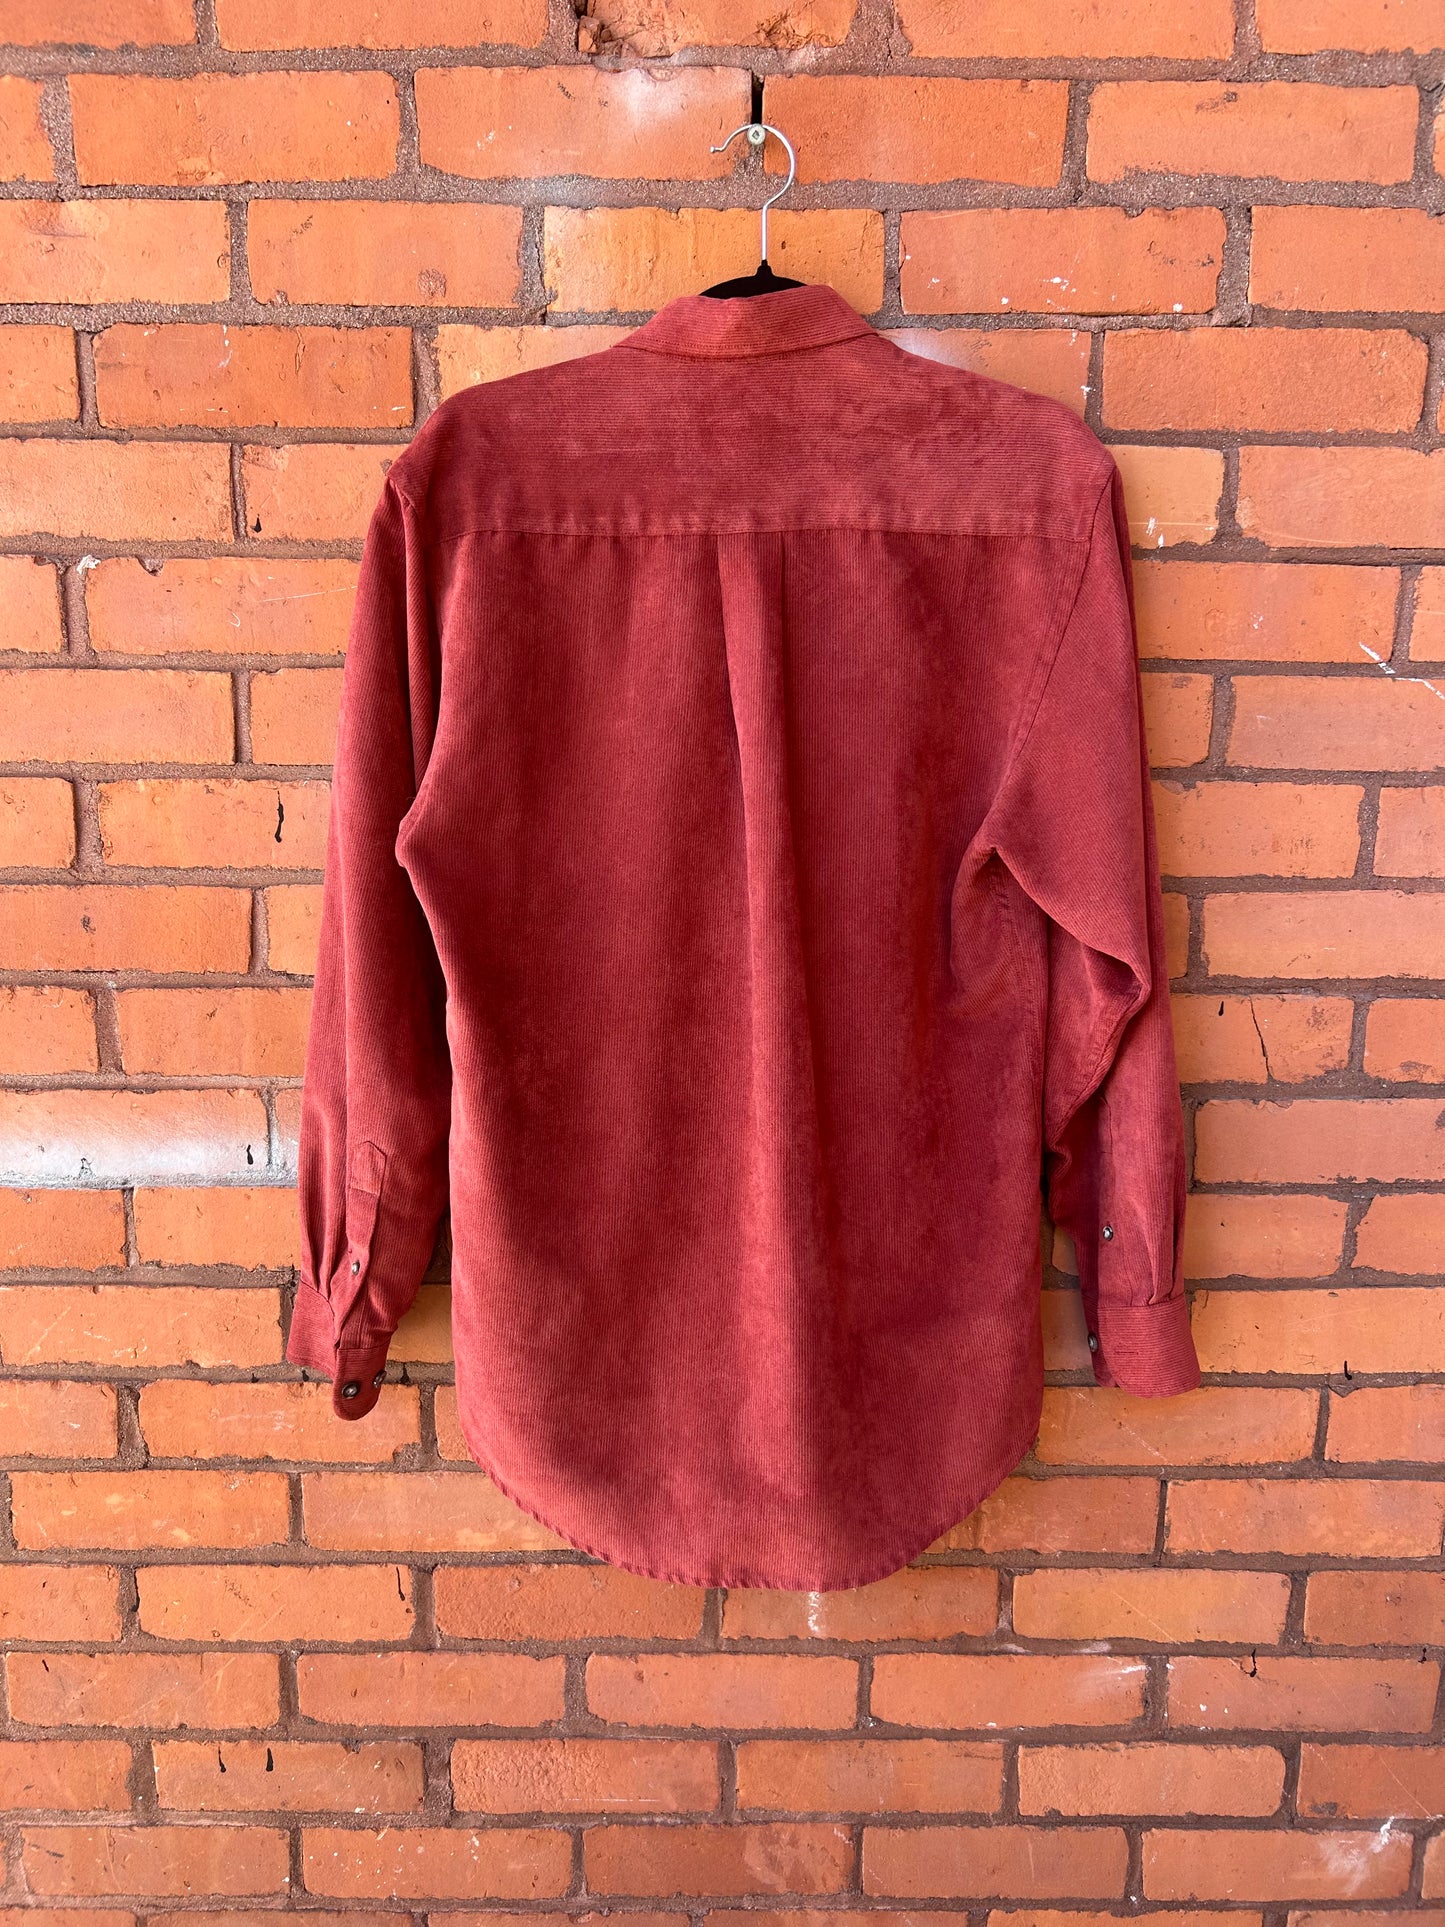 90’s Rust Red Soft Button Down Shirt / Size L